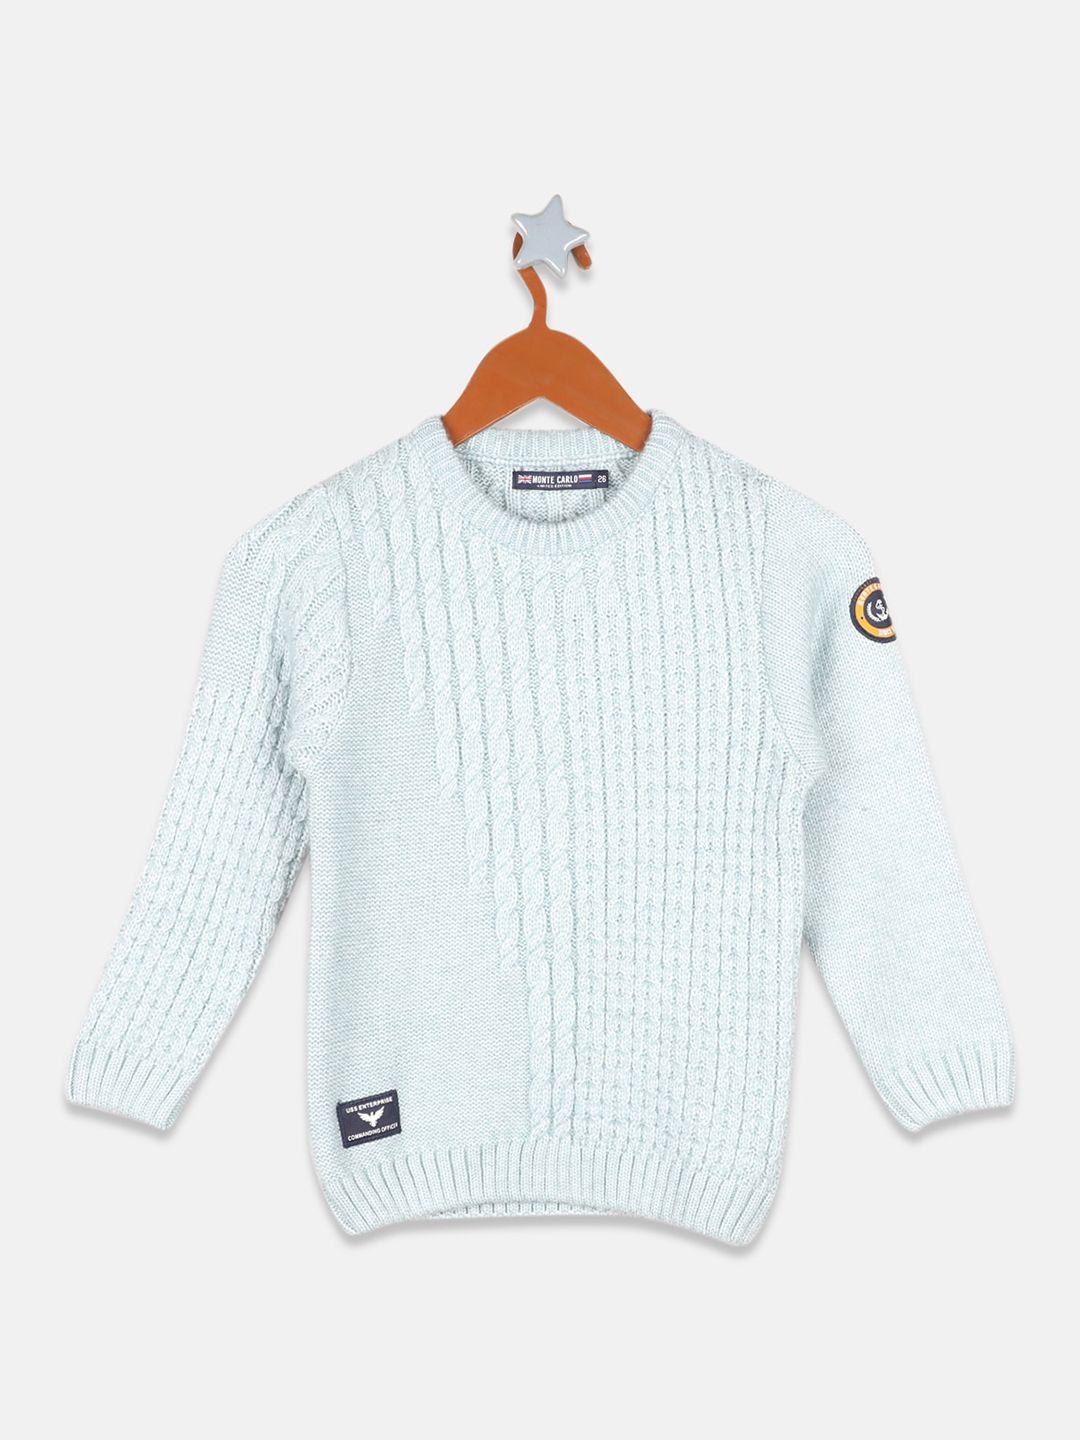 monte carlo boys teal cable knit pullover